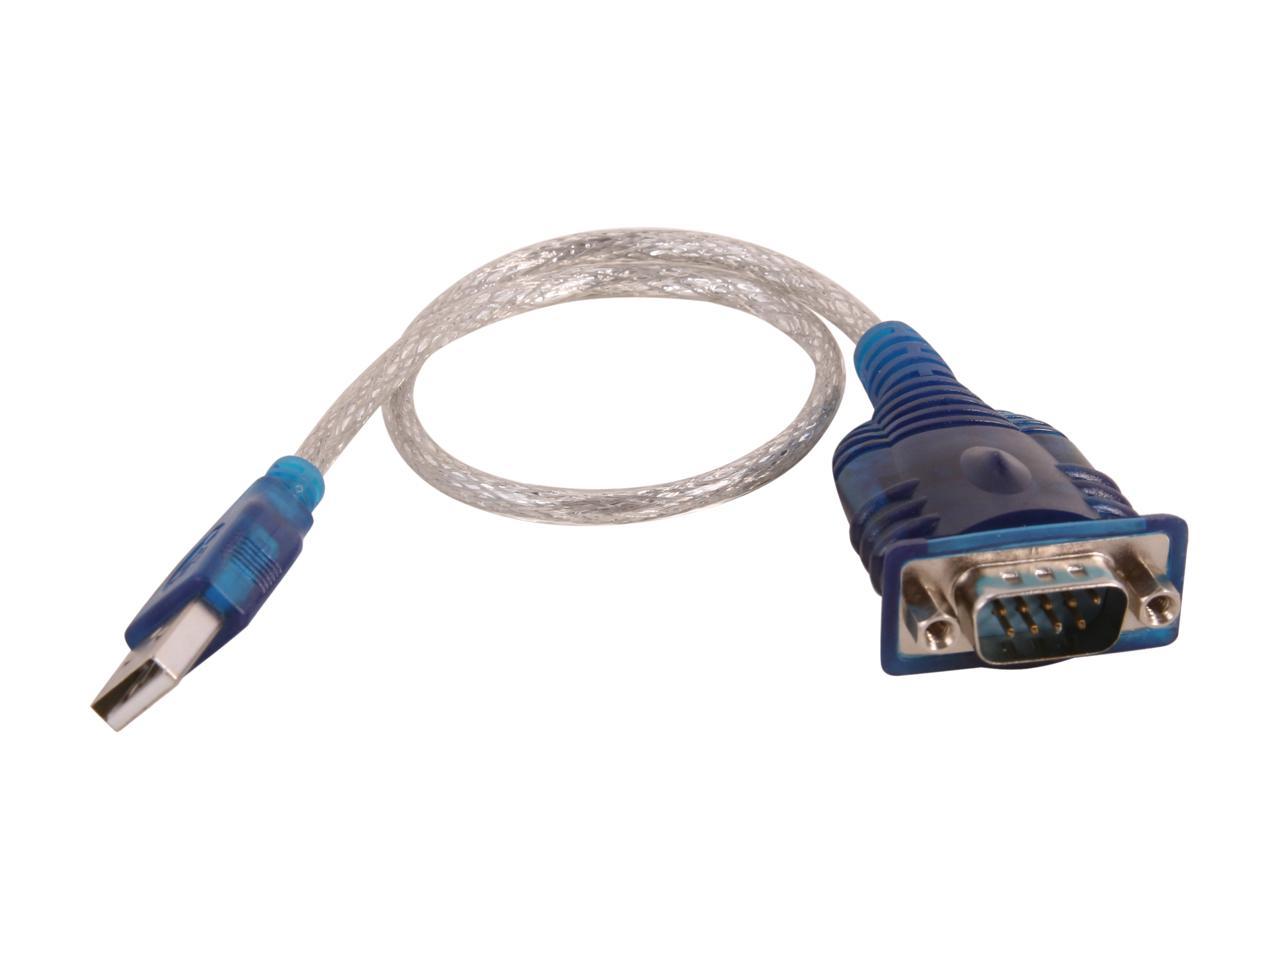 sabrent usb 2.0 serial cable adapter